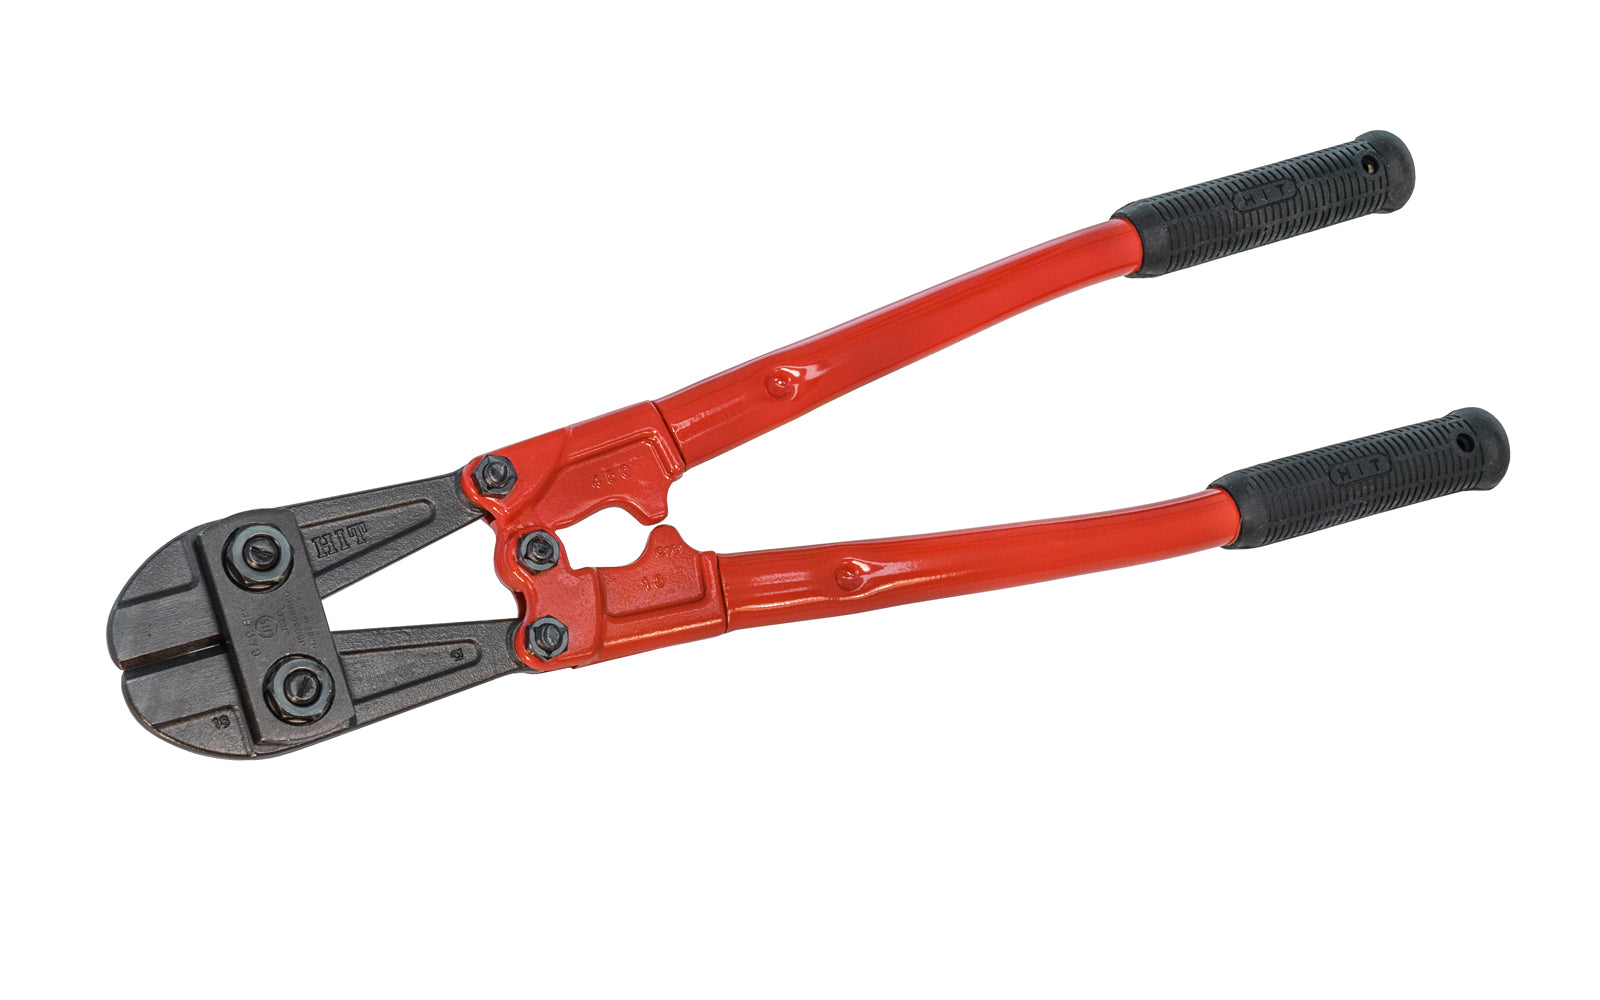 These Japanese "Hit" Bolt Cutters are for general purpose use & designed for cutting medium steel & soft bolts, nuts, rods, chain. Jaws are made of drop forged high grade alloy tool steel with heat treated, precision cutting edges. Max hardness of material to cut: Brinell 370/Rockwell C42, 85 Tons/Sq 133 Kg/square mm